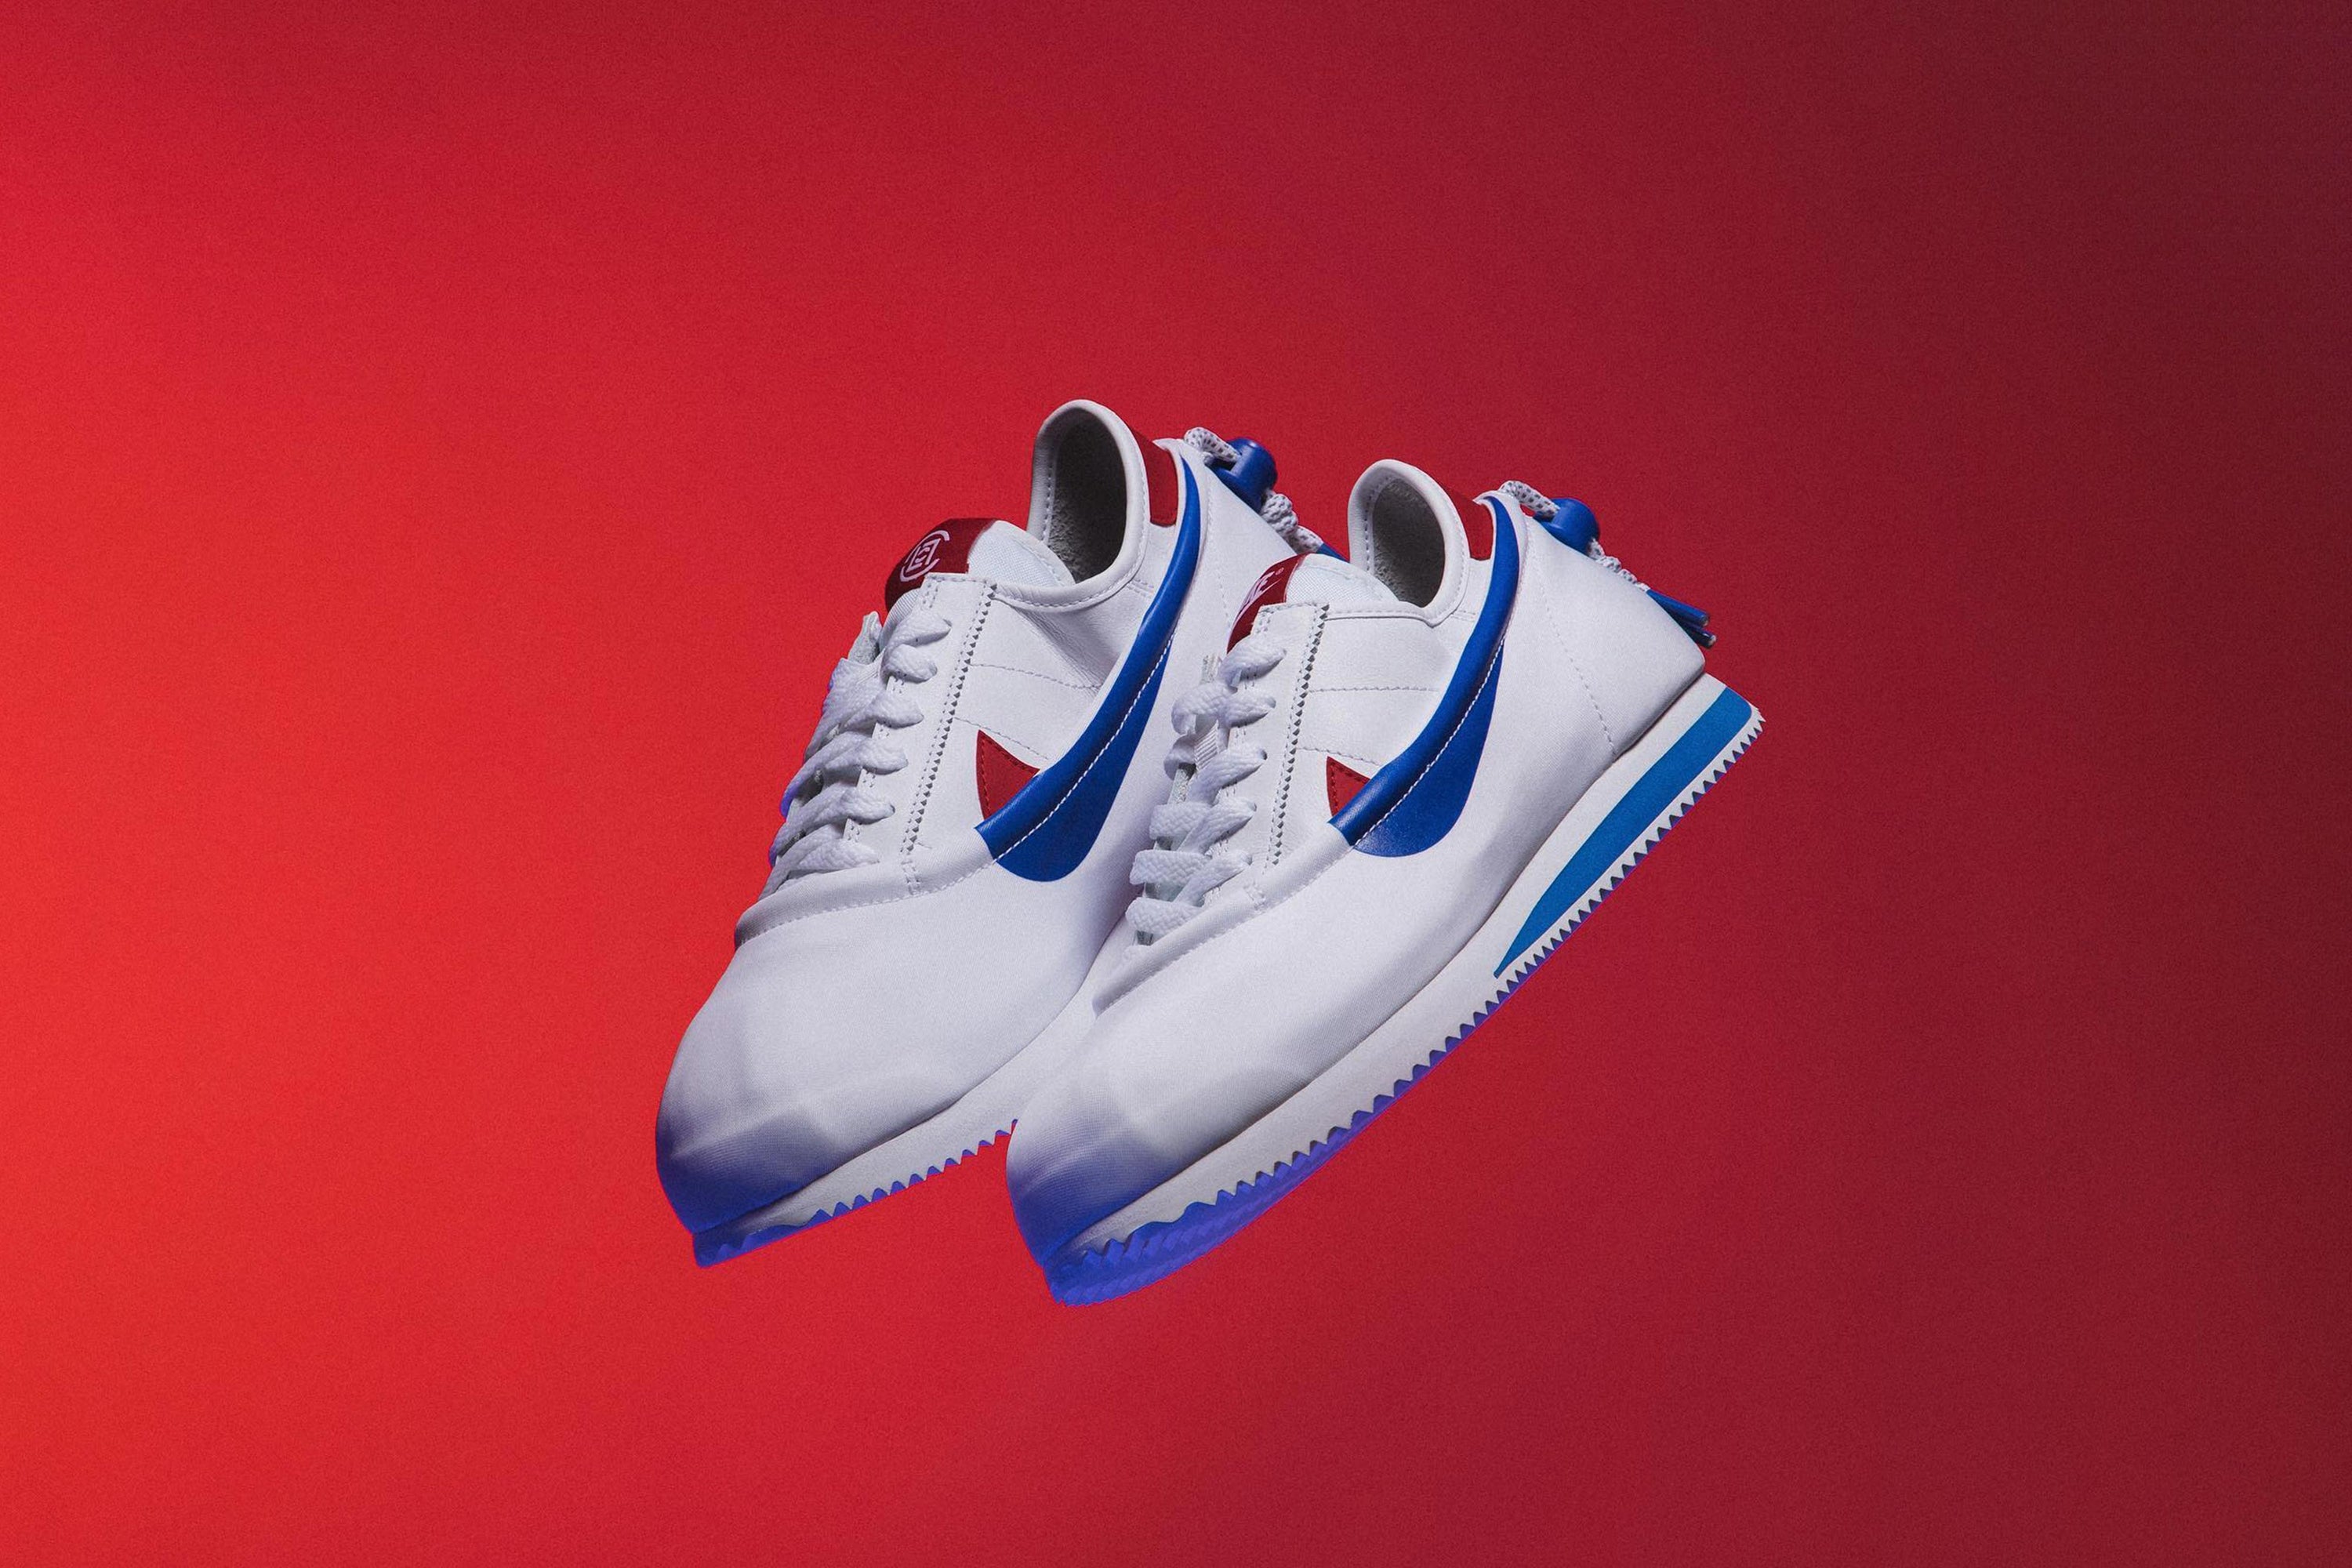 CLOT x Nike Cortez 'White and Game Royal' 14/4/23